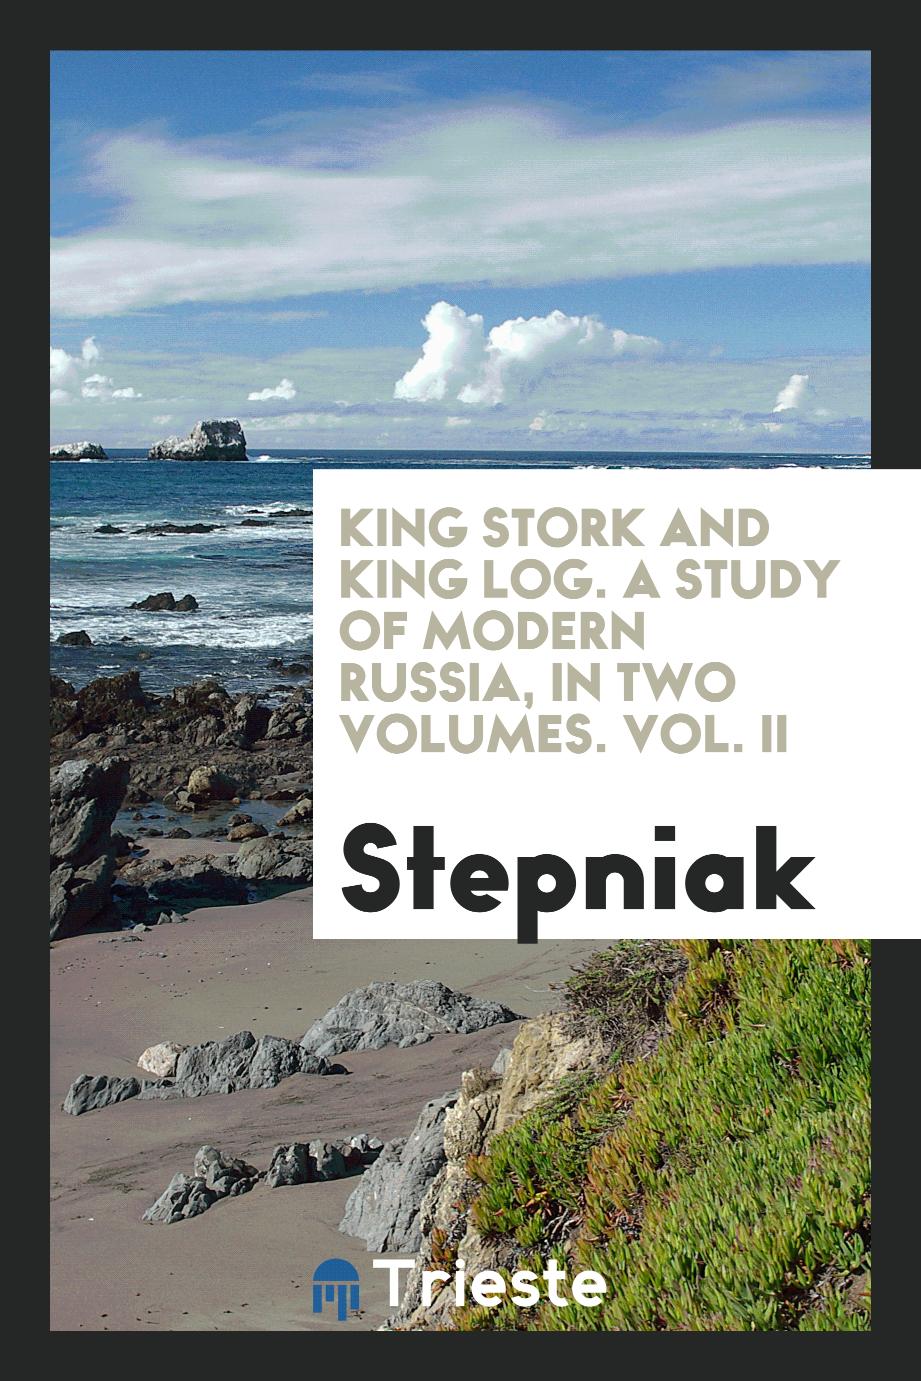 King Stork and King Log. A study of modern Russia, in two volumes. Vol. II